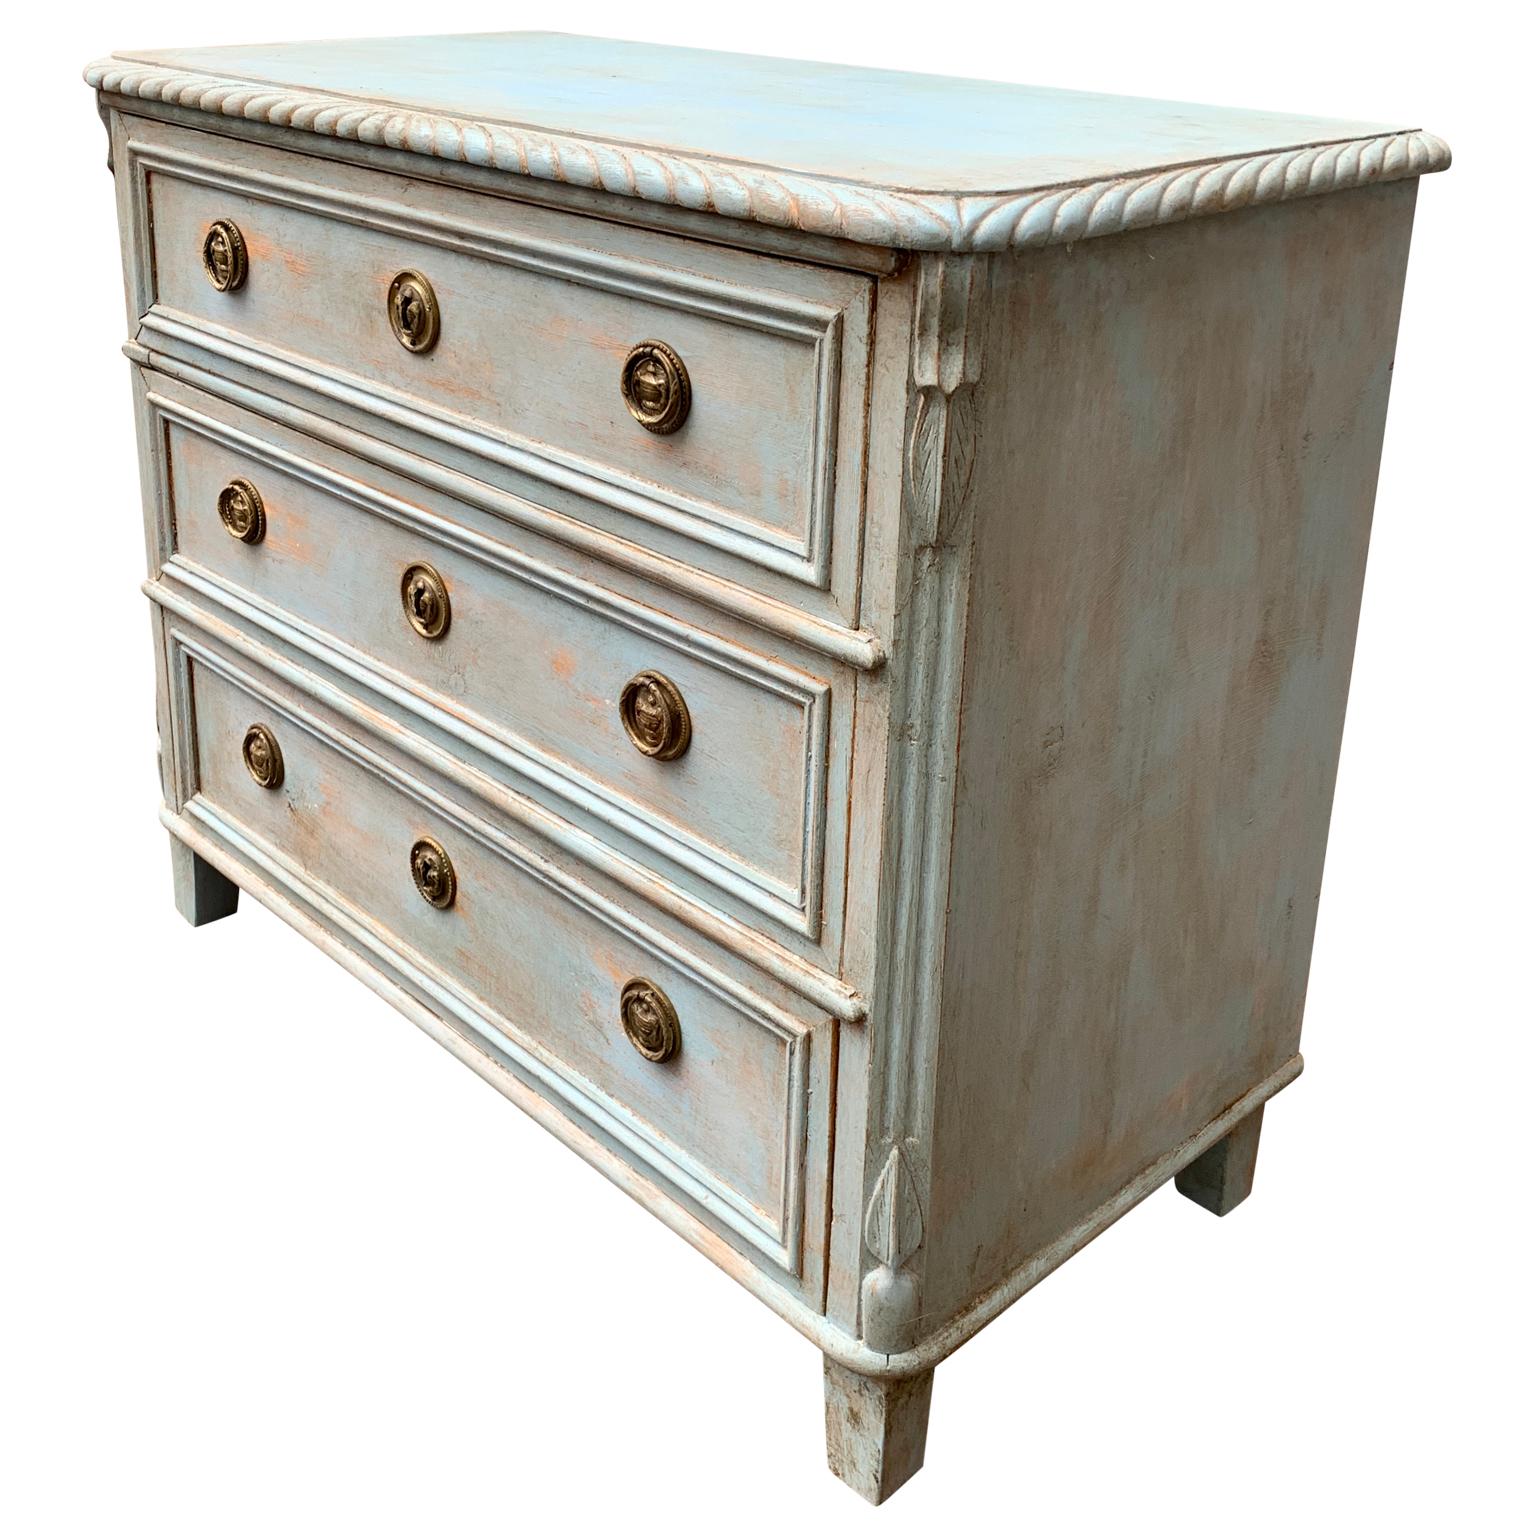 A small Gustavian-style light blue painted chest with 3 drawers and brass hardware from the second half of the 19th Century. This little Scandinavian chest could be used as a nightstand, it is clean, fresh pine scent and inside the drawers can be